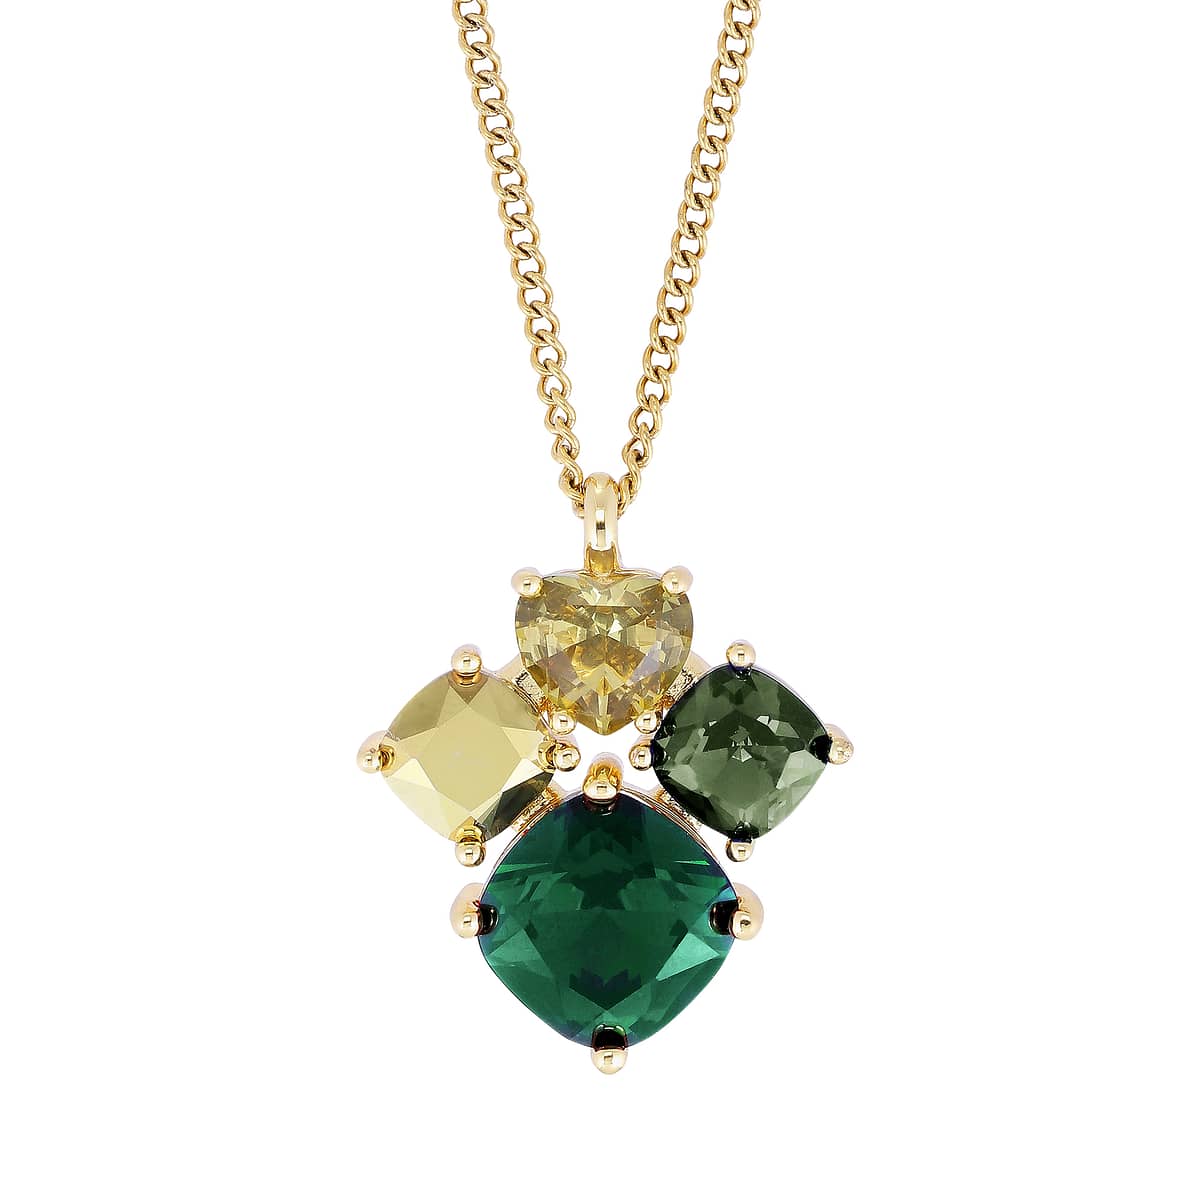 MASIKA - is an eye catching pendant necklace made with a pendant created with several handset crystals on a prongset backdrop. Length is 40 cm + extension chain. Here shown in an emerald green and golden finish. Nickel free Danish design.